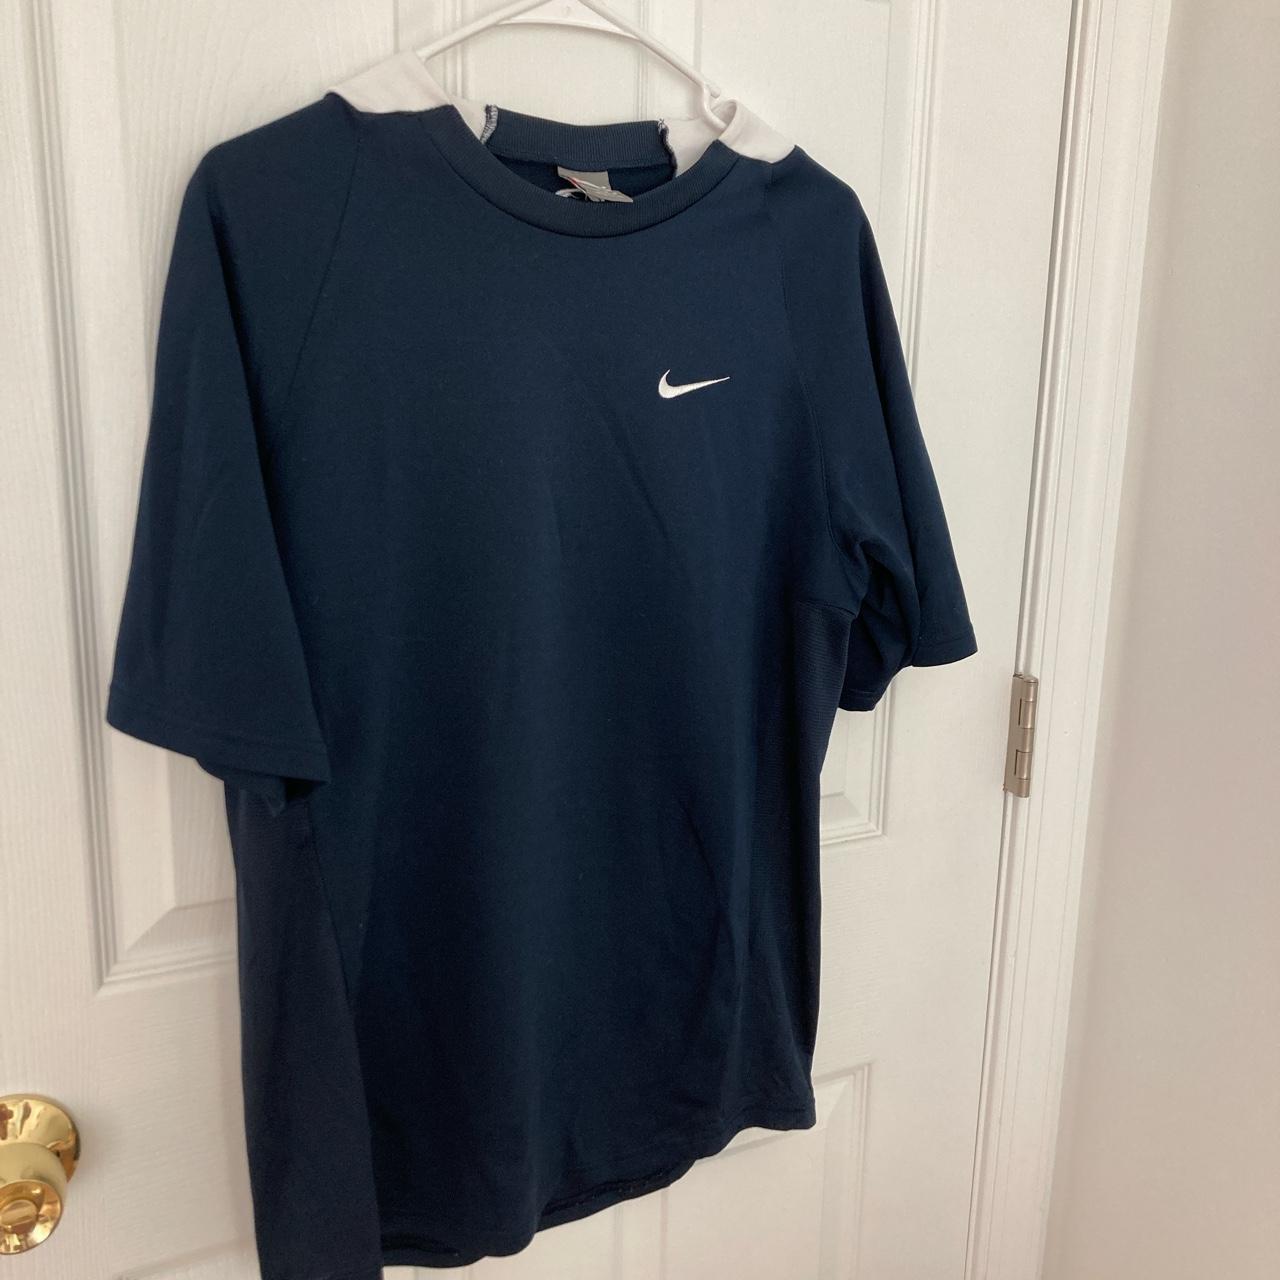 Blue nike shirt with white patches at the top - Depop